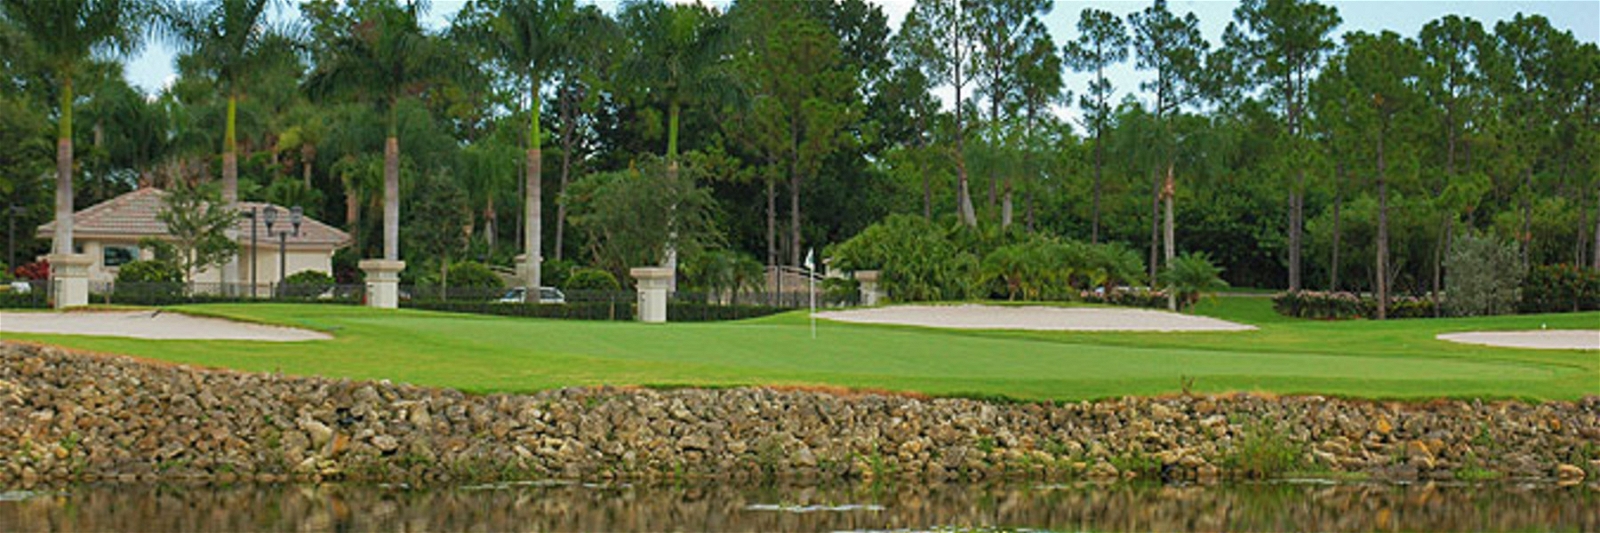 Golf Vacation Package - PGA National - Estate Course